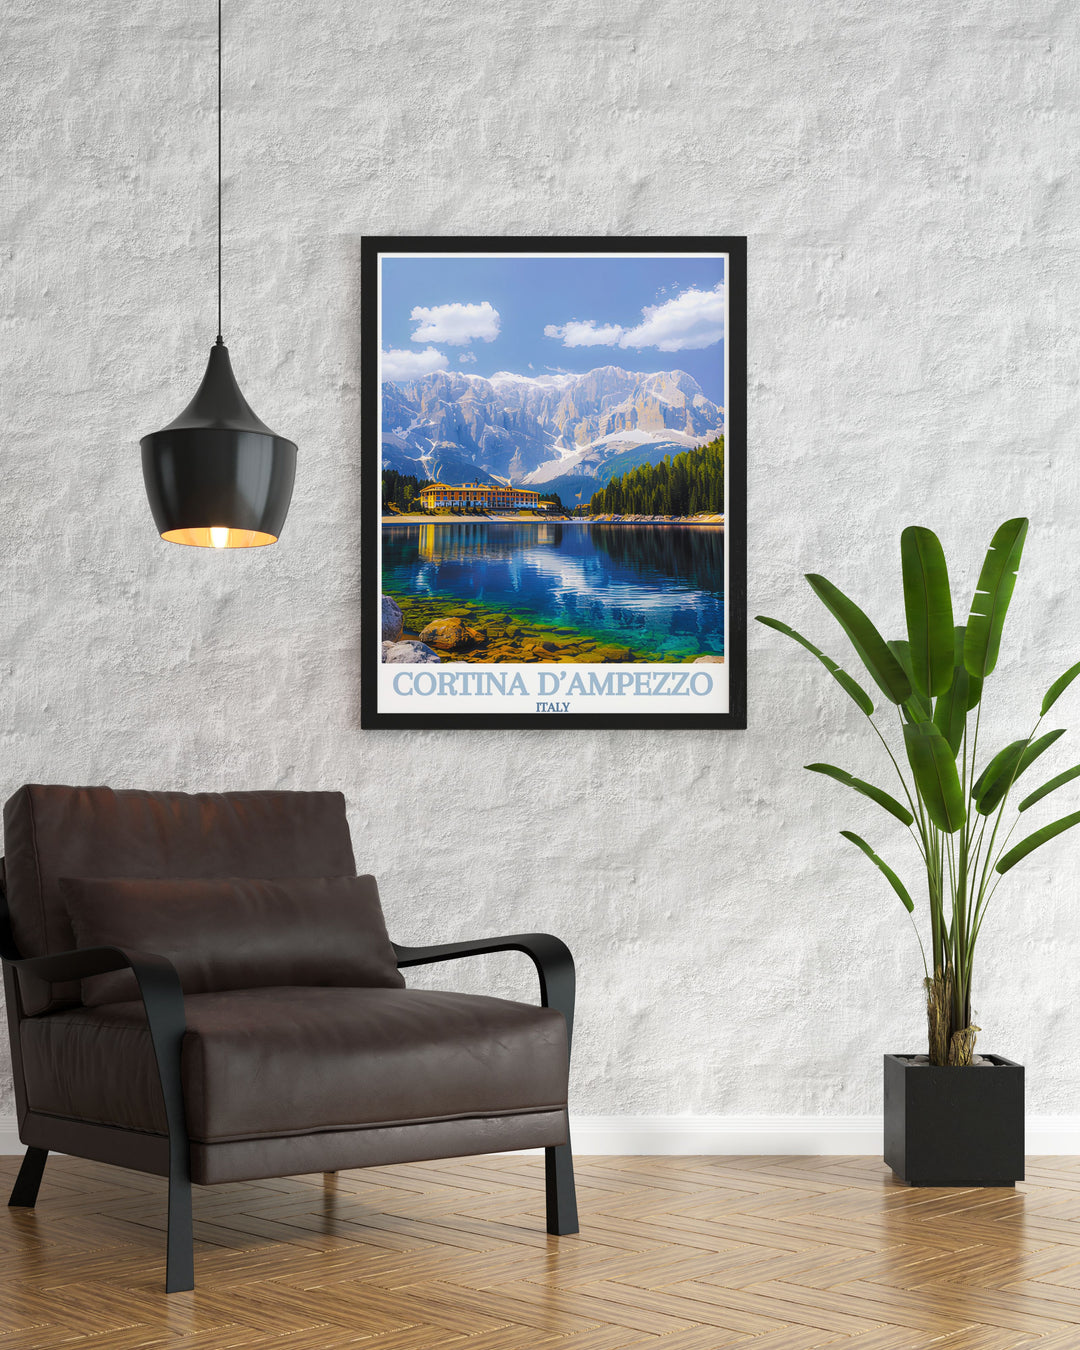 Discover the rich history and stunning landscapes of Cortina dAmpezzo and Lake Misurina with our unique art prints. Perfect for history enthusiasts and nature lovers alike, these artworks capture the timeless allure and cultural significance of this beautiful Italian region.